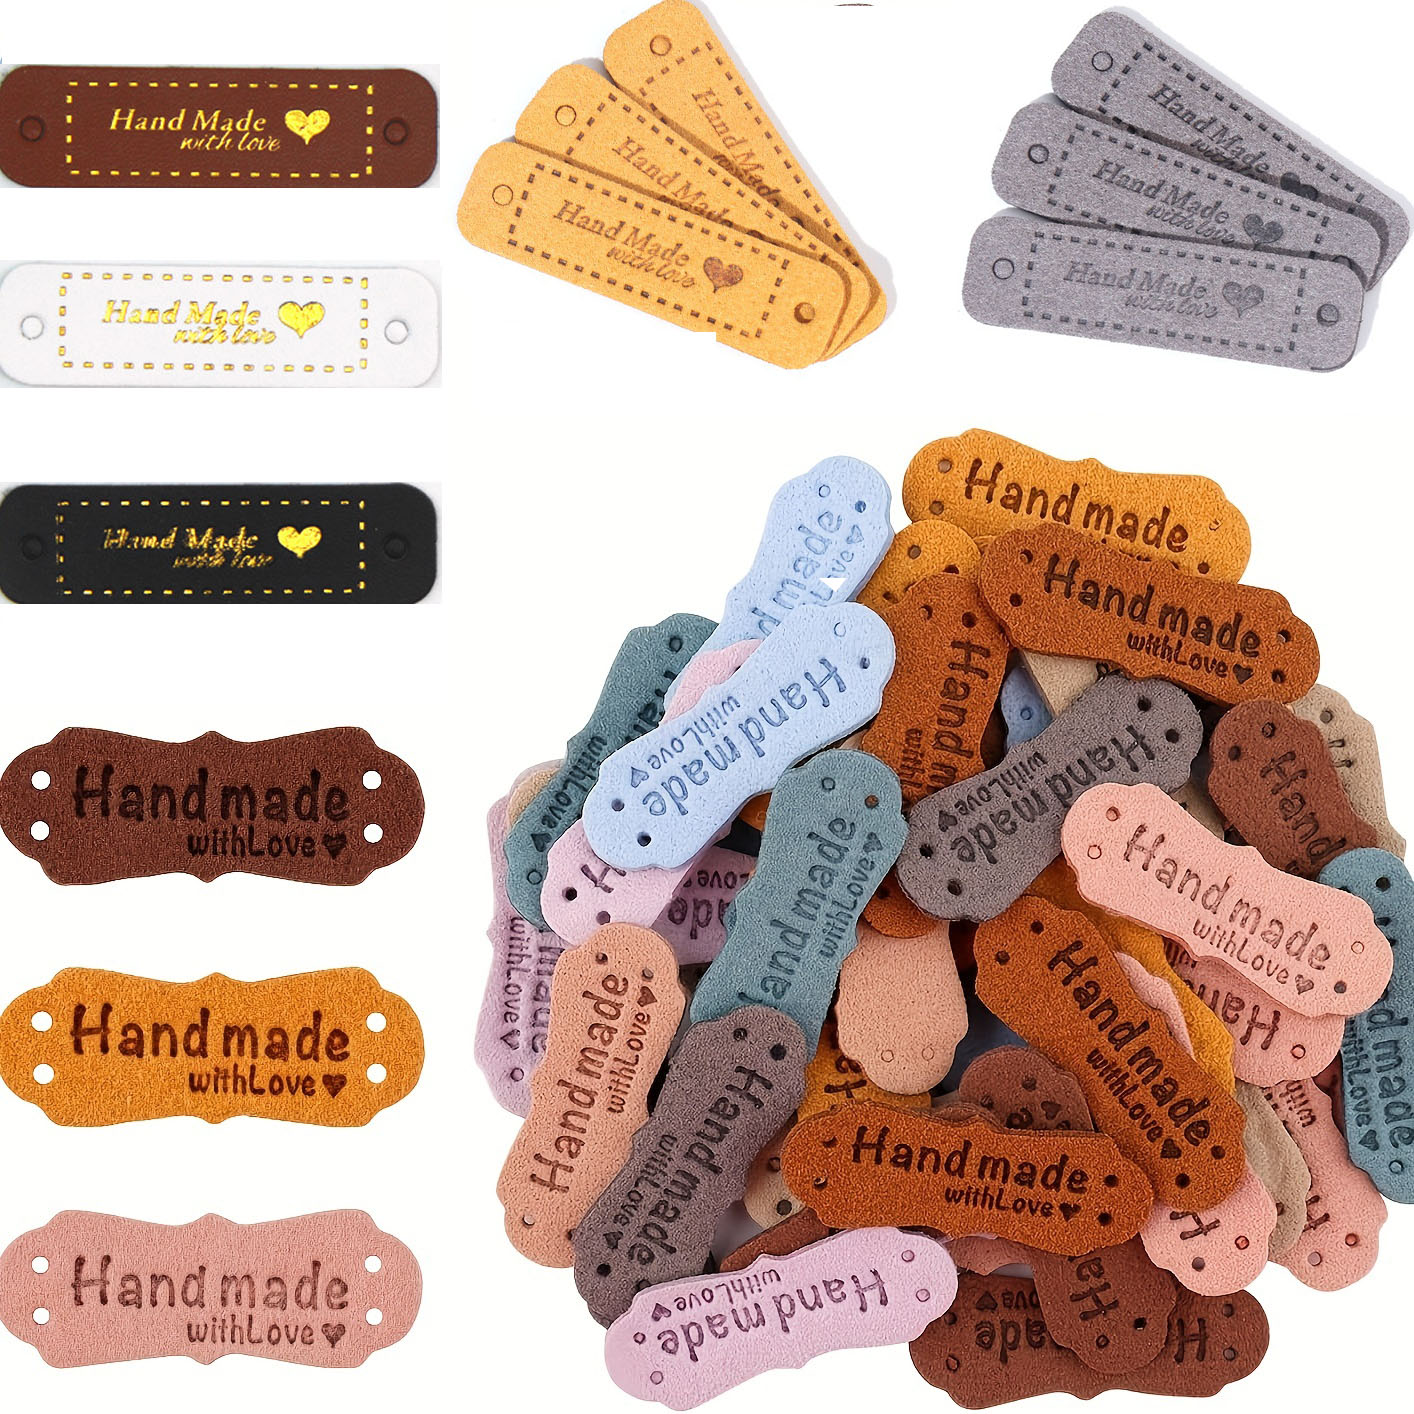  Personalized Leather Label Tags, Custom Knitting Tags, PU Leather  Tags with Metal Rivet, Tags for Handmade Items, Screw On Faux Leather Tags  : Handmade Products